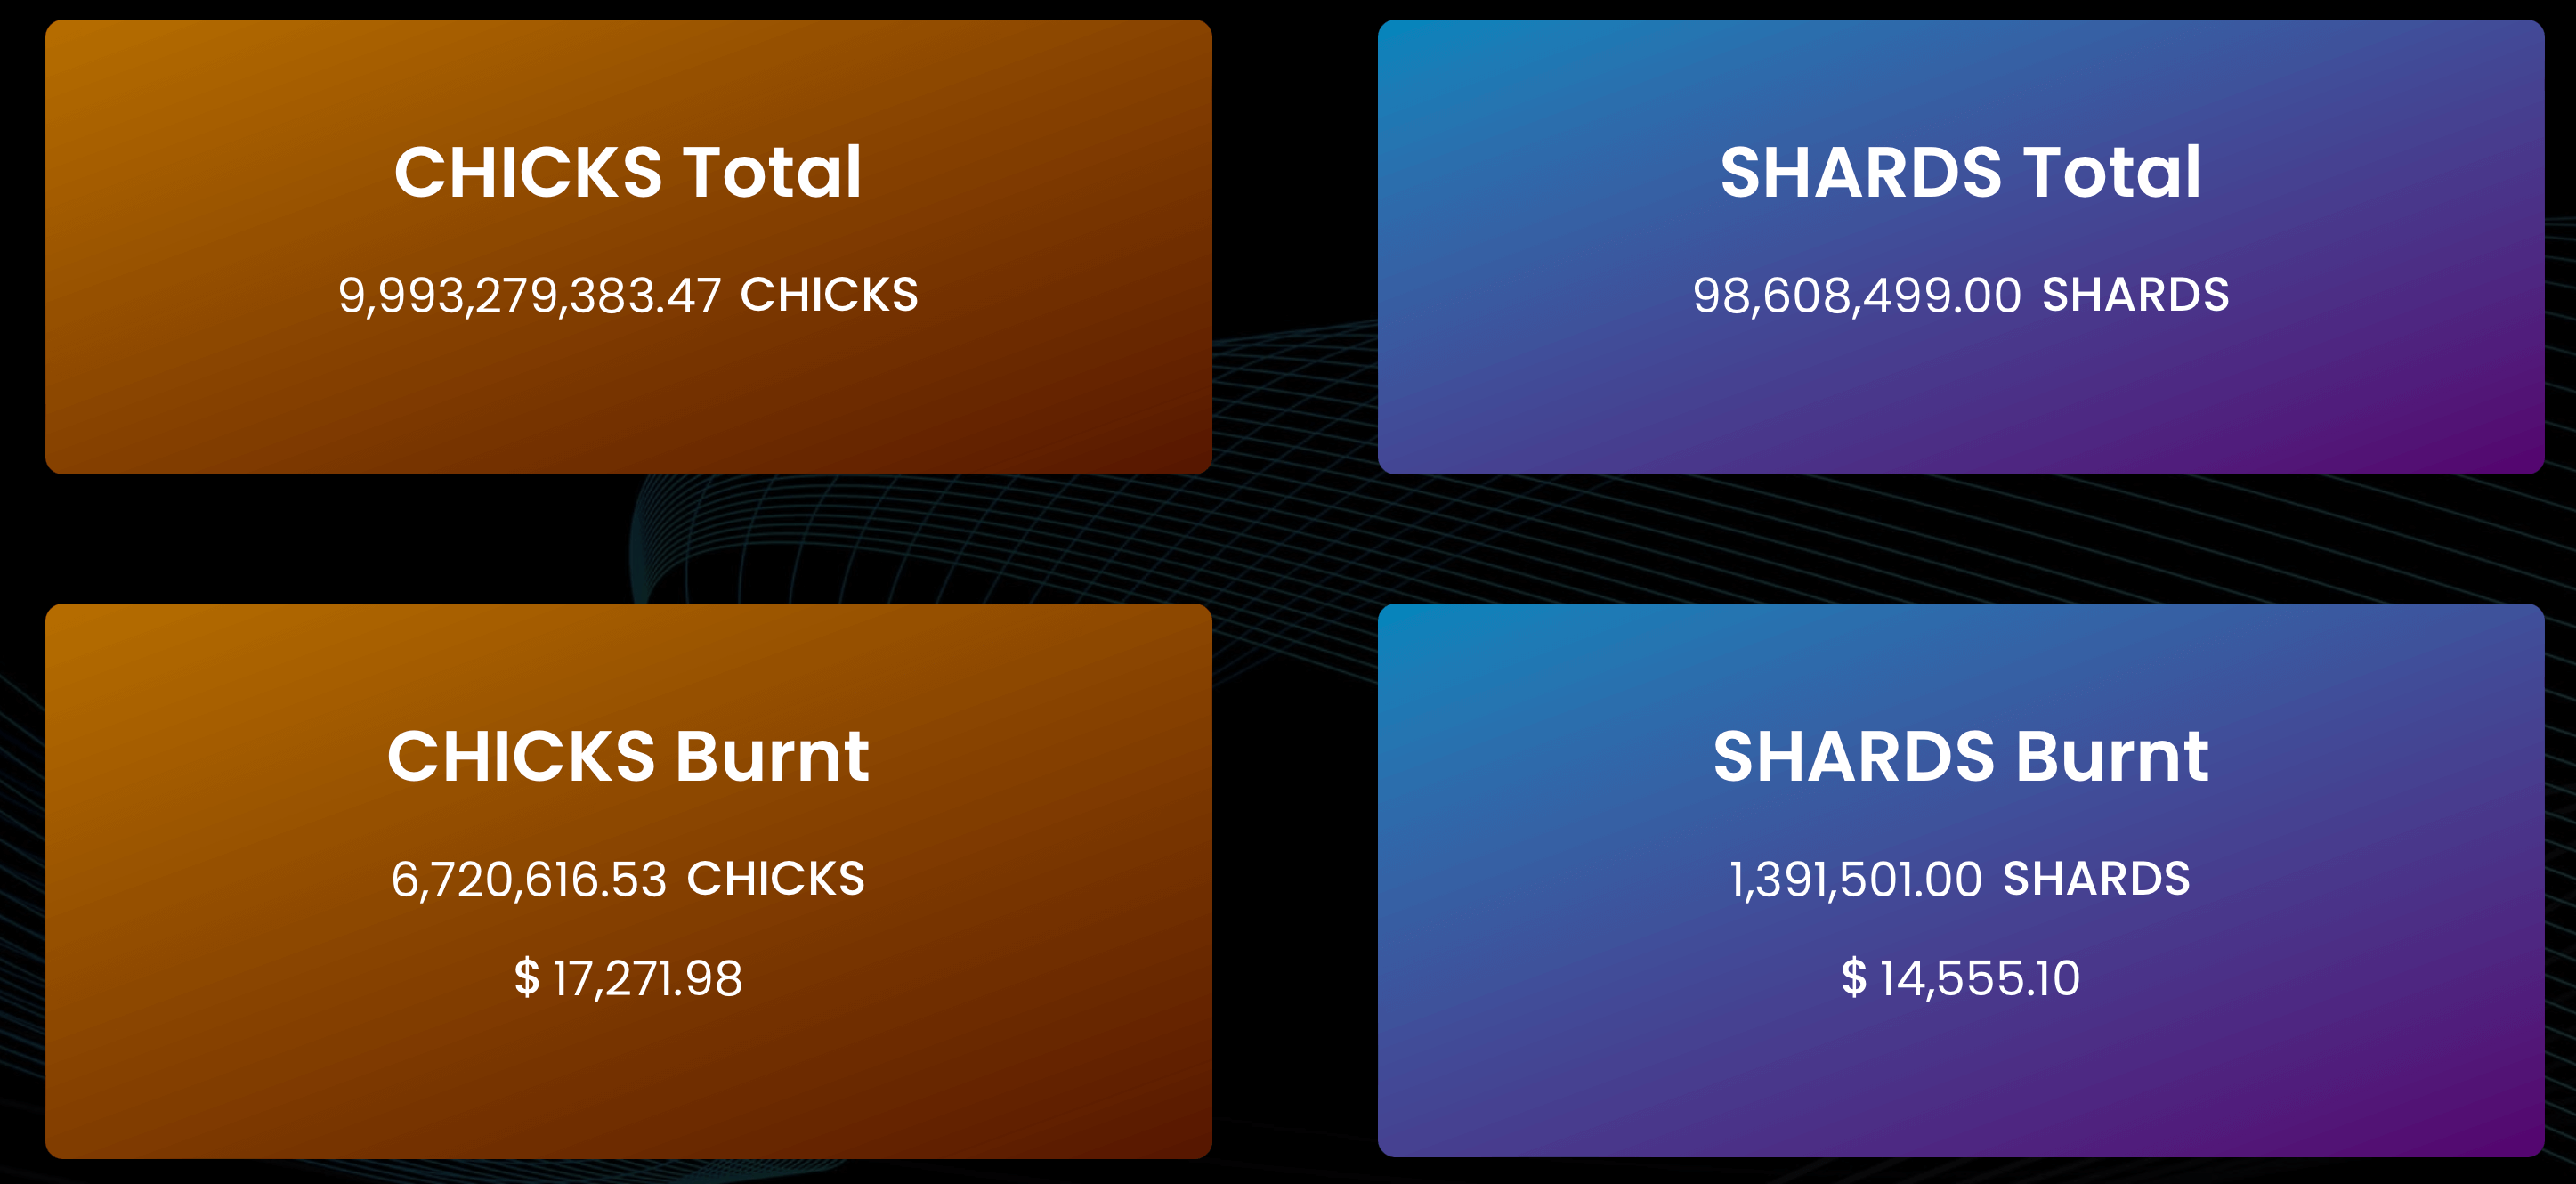 CHICKS/SHARDS Tokenomics - The total supply dashboard showing the number of CHICKS and SHARDS burned and their value in USD